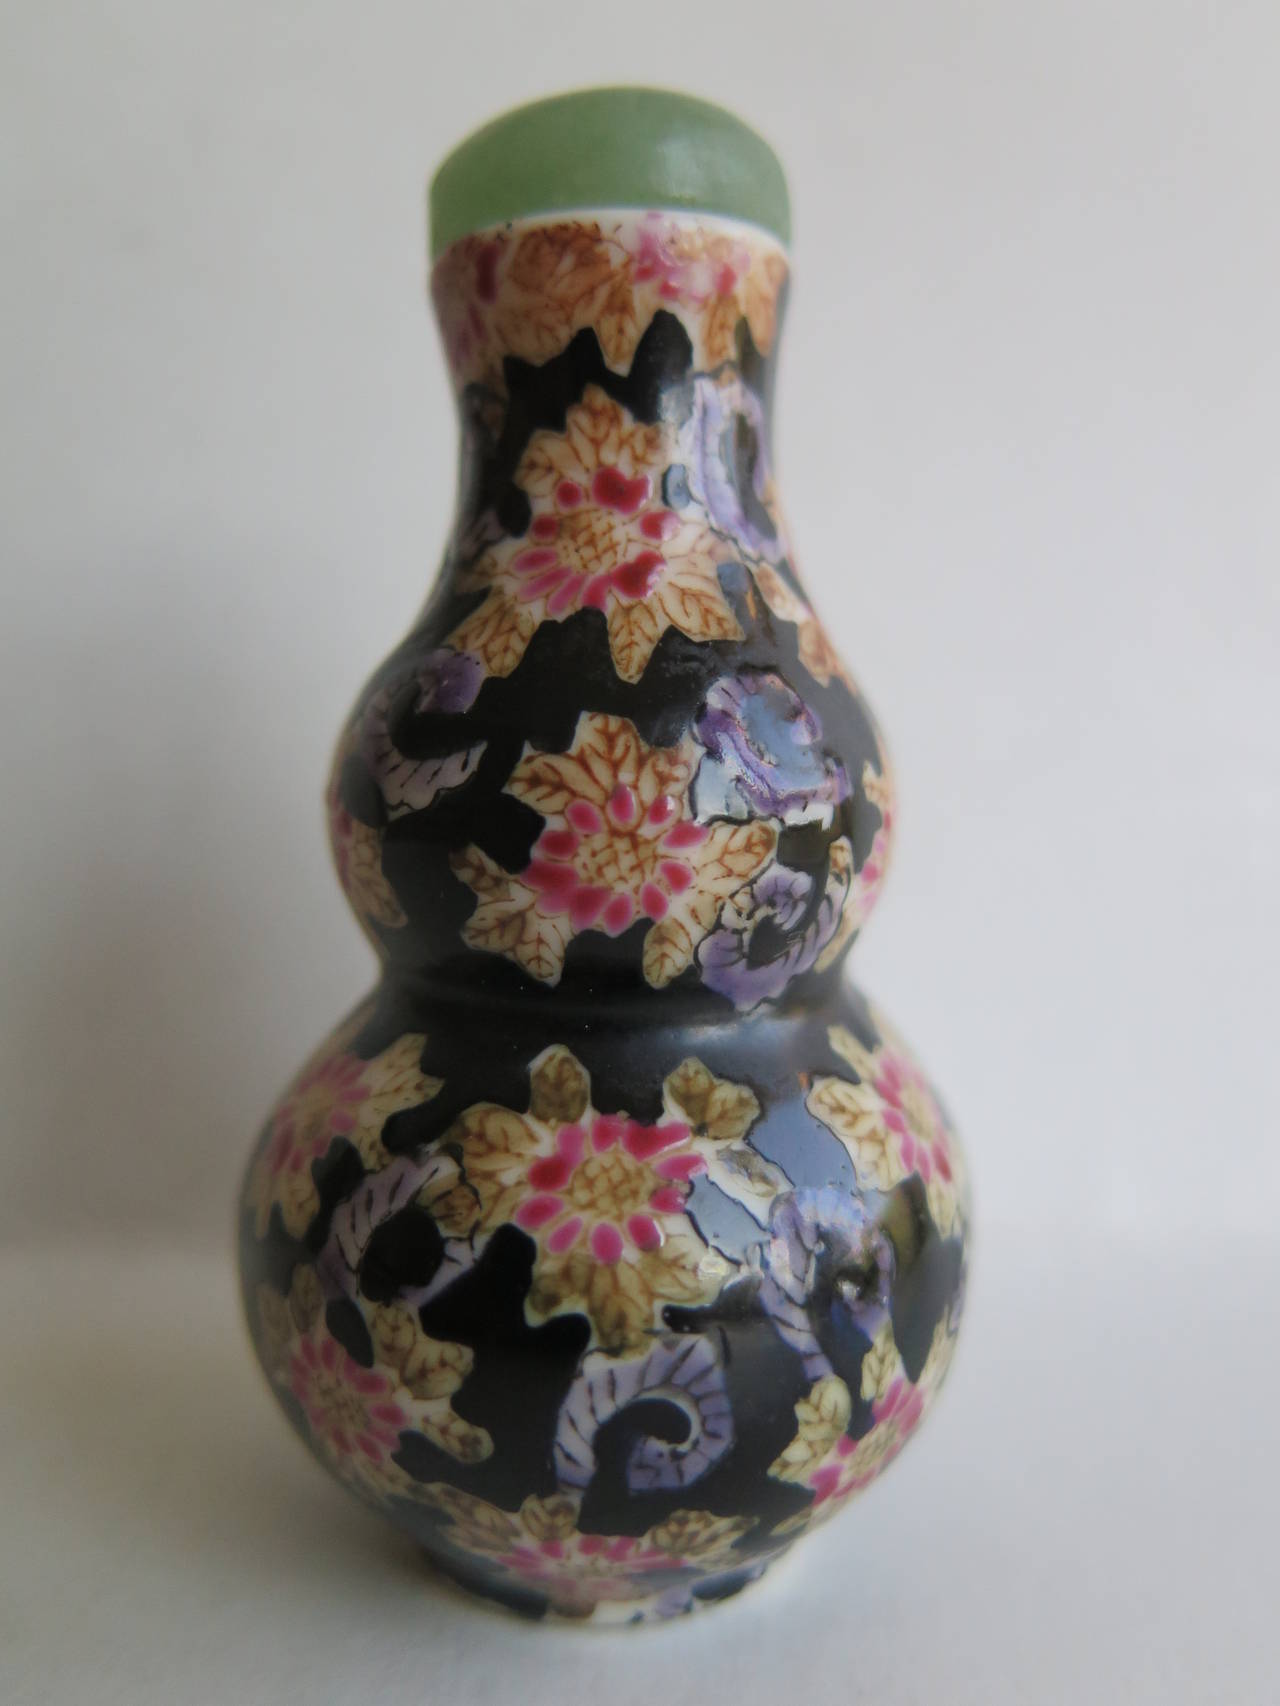 This is a beautiful Chinese porcelain snuff bottle which we date to the early 20th century.

The bottle is made of porcelain and has a classical double gourd shape.

It is decorated with an under-glaze floral pattern in a light beige color which